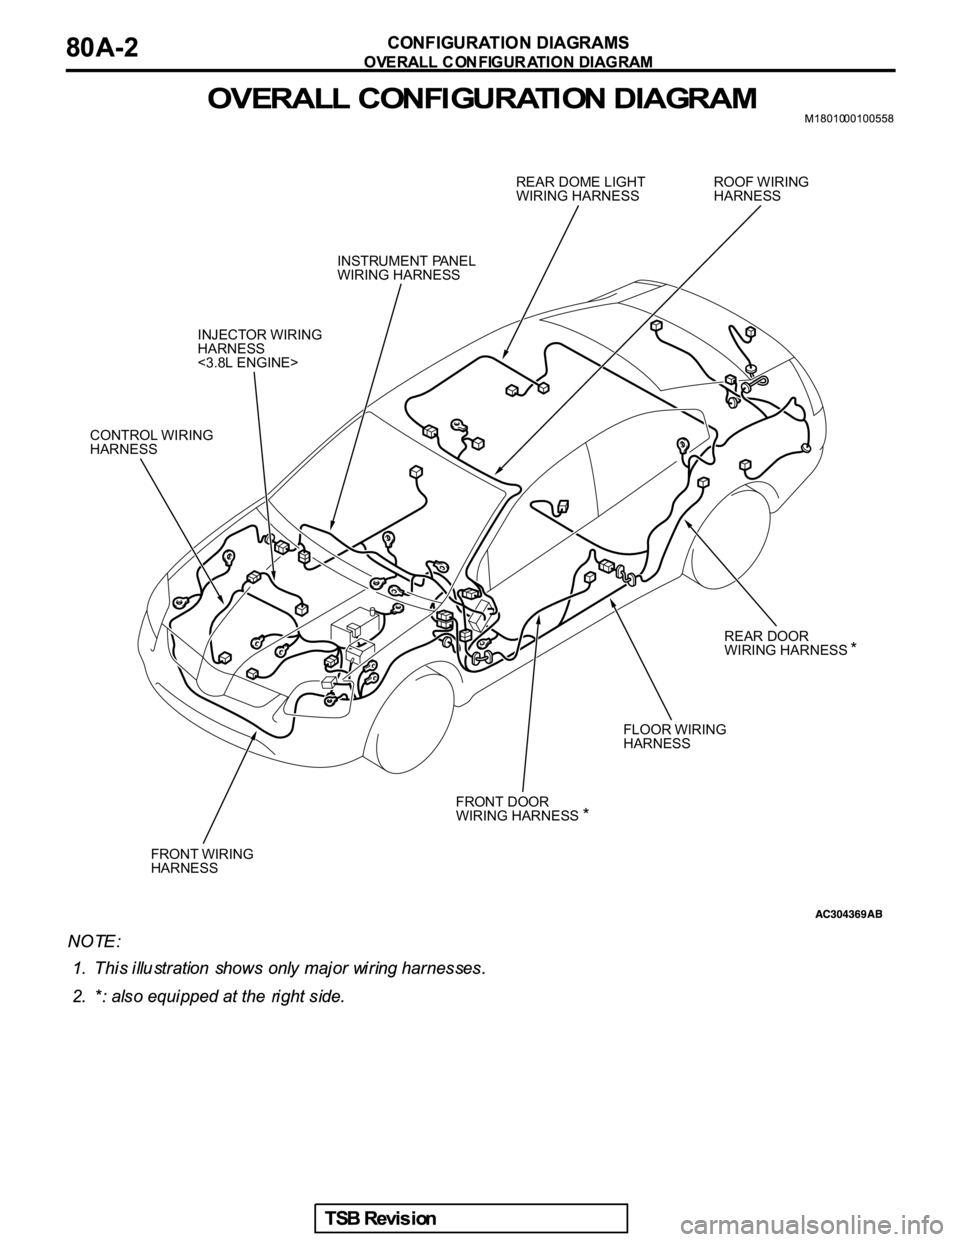 MITSUBISHI GALANT 2005  Service Repair Manual CONTROL WIRING
HARNESSINJECTOR WIRING
HARNESS
<3.8L ENGINE>INSTRUMENT PANEL
WIRING HARNESSREAR DOME LIGHT
WIRING HARNESSROOF WIRING
HARNESS
FRONT WIRING
HARNESSFLOOR WIRING
HARNESSREAR DOOR
WIRING HAR